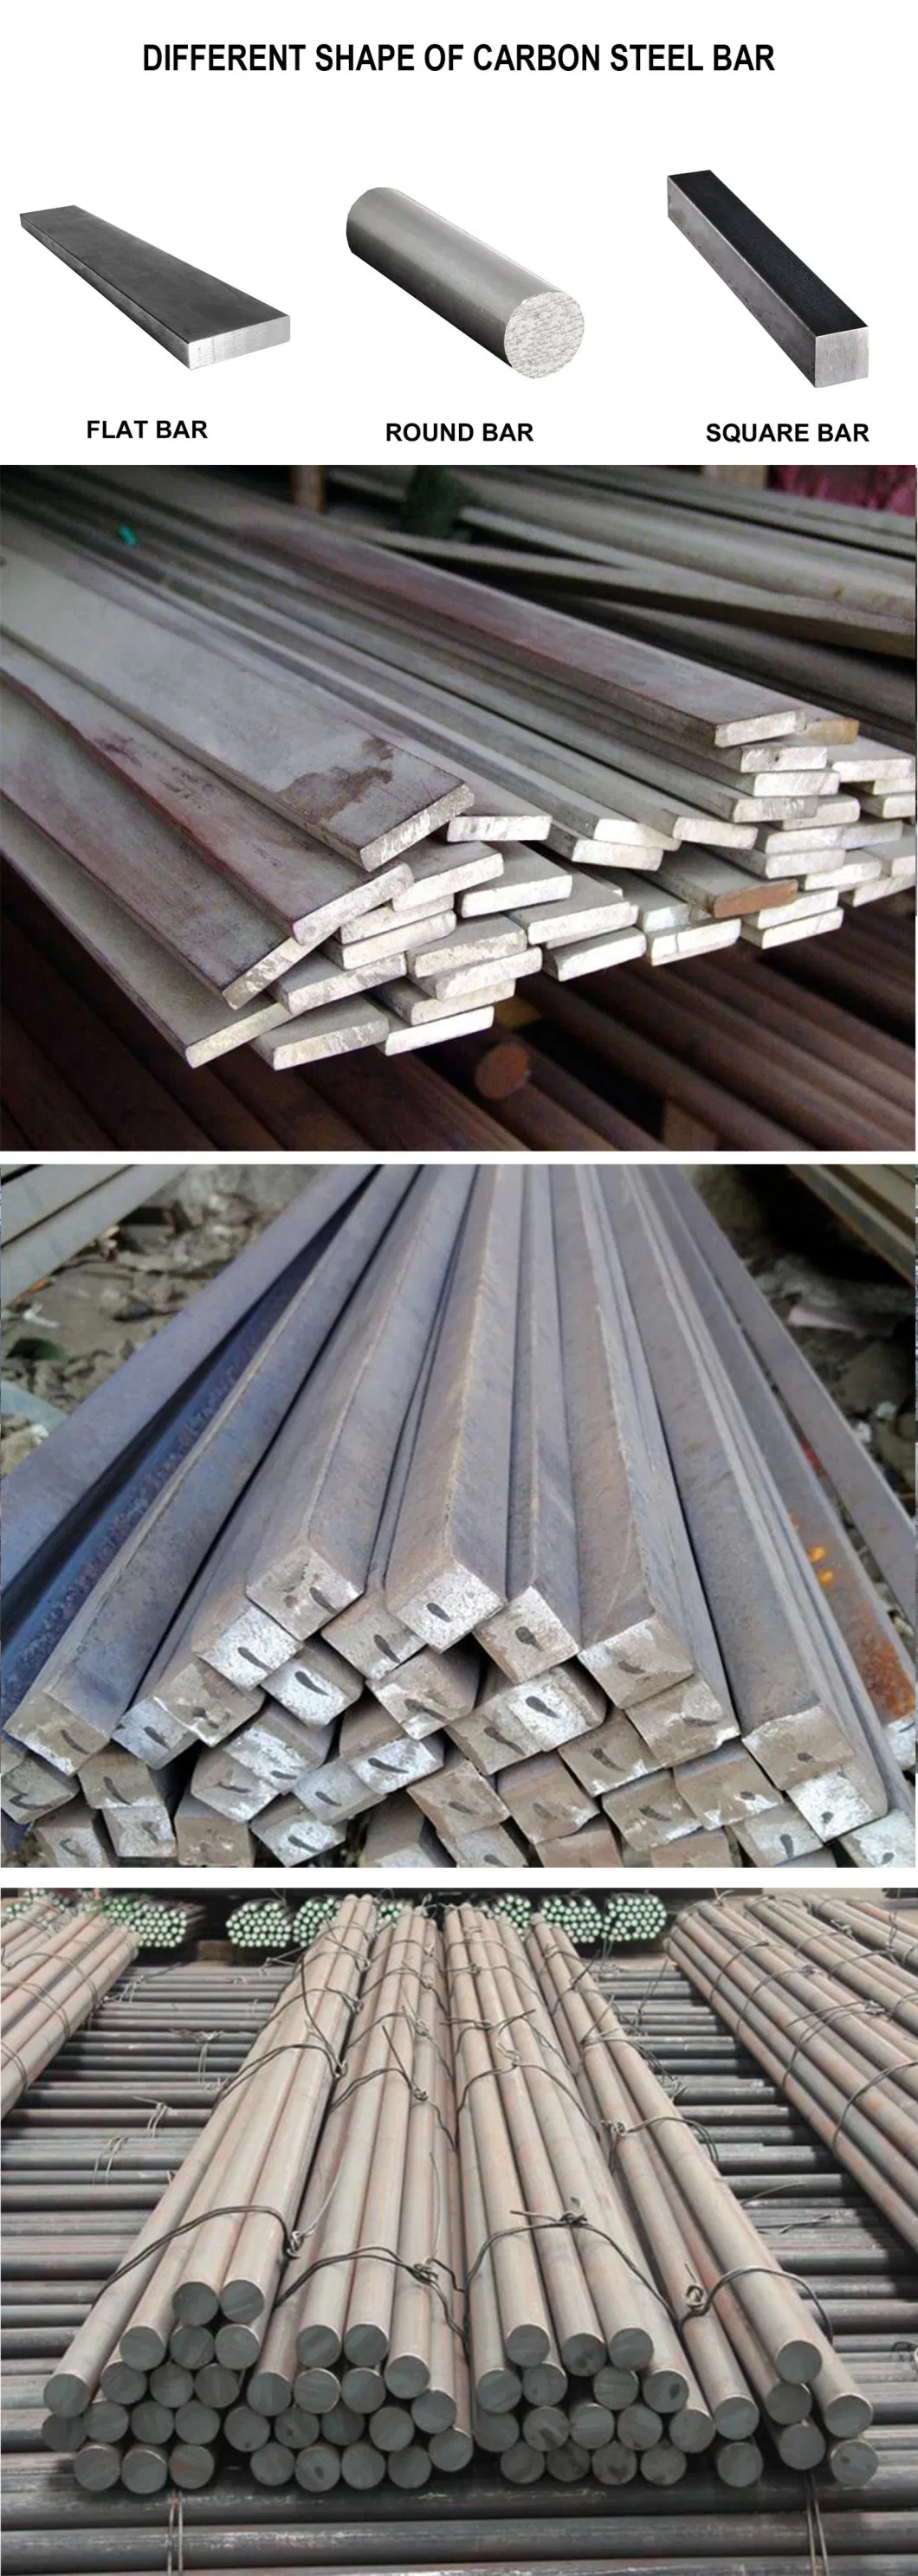 Manufacturer Ss440 A36 Q235 1045 S45c C45 4140 En19 Scm440 40cr B7 42CrMo4 12L14 1215 1144 Cold Finished Cold Drawn Bright Steel Round Bar Steel Bar Price